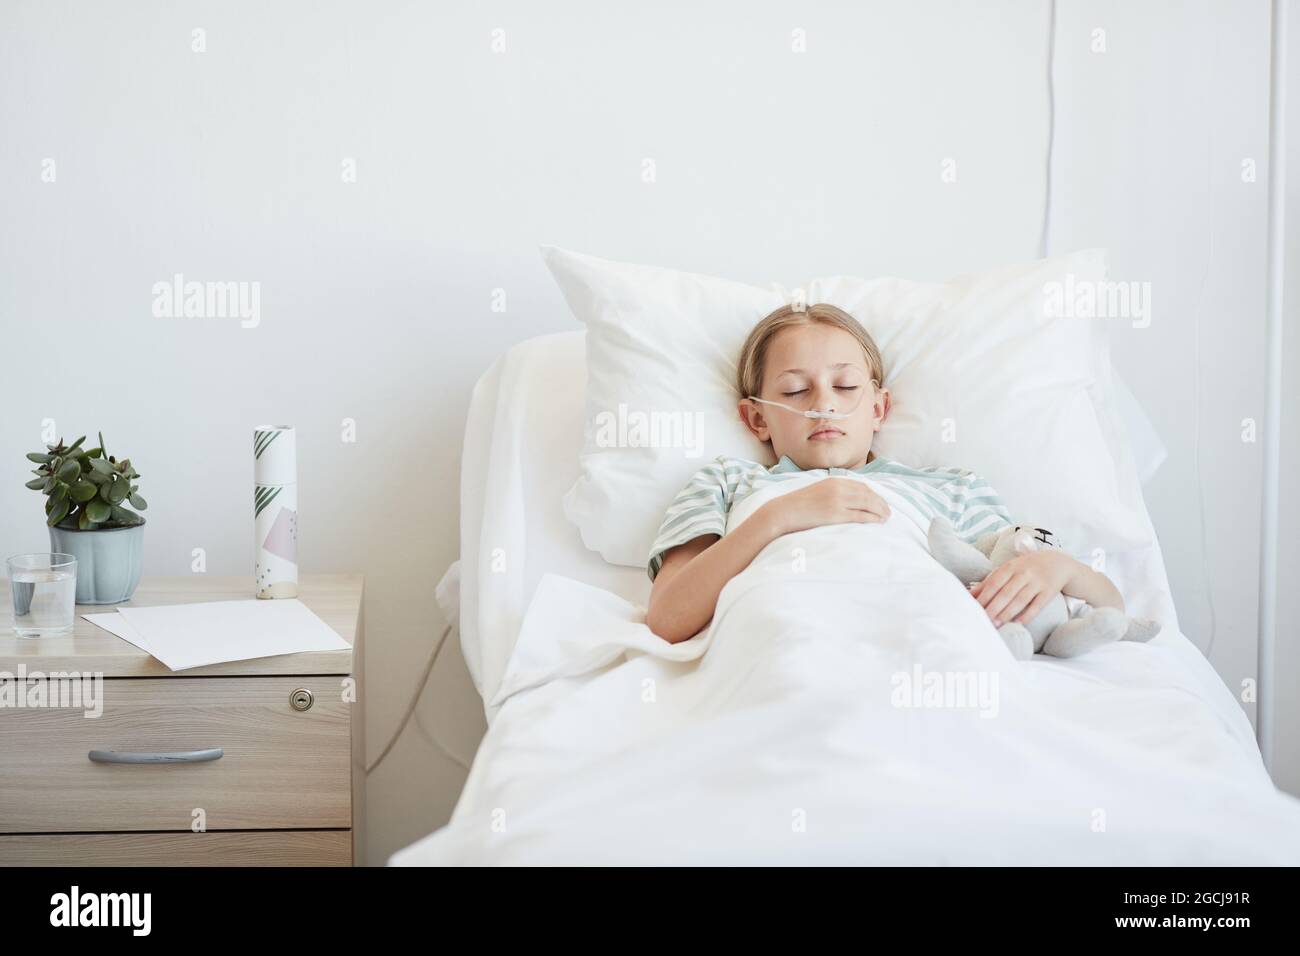 Portrait of little girl laying in hospital bed with oxygen support, copy space Stock Photo